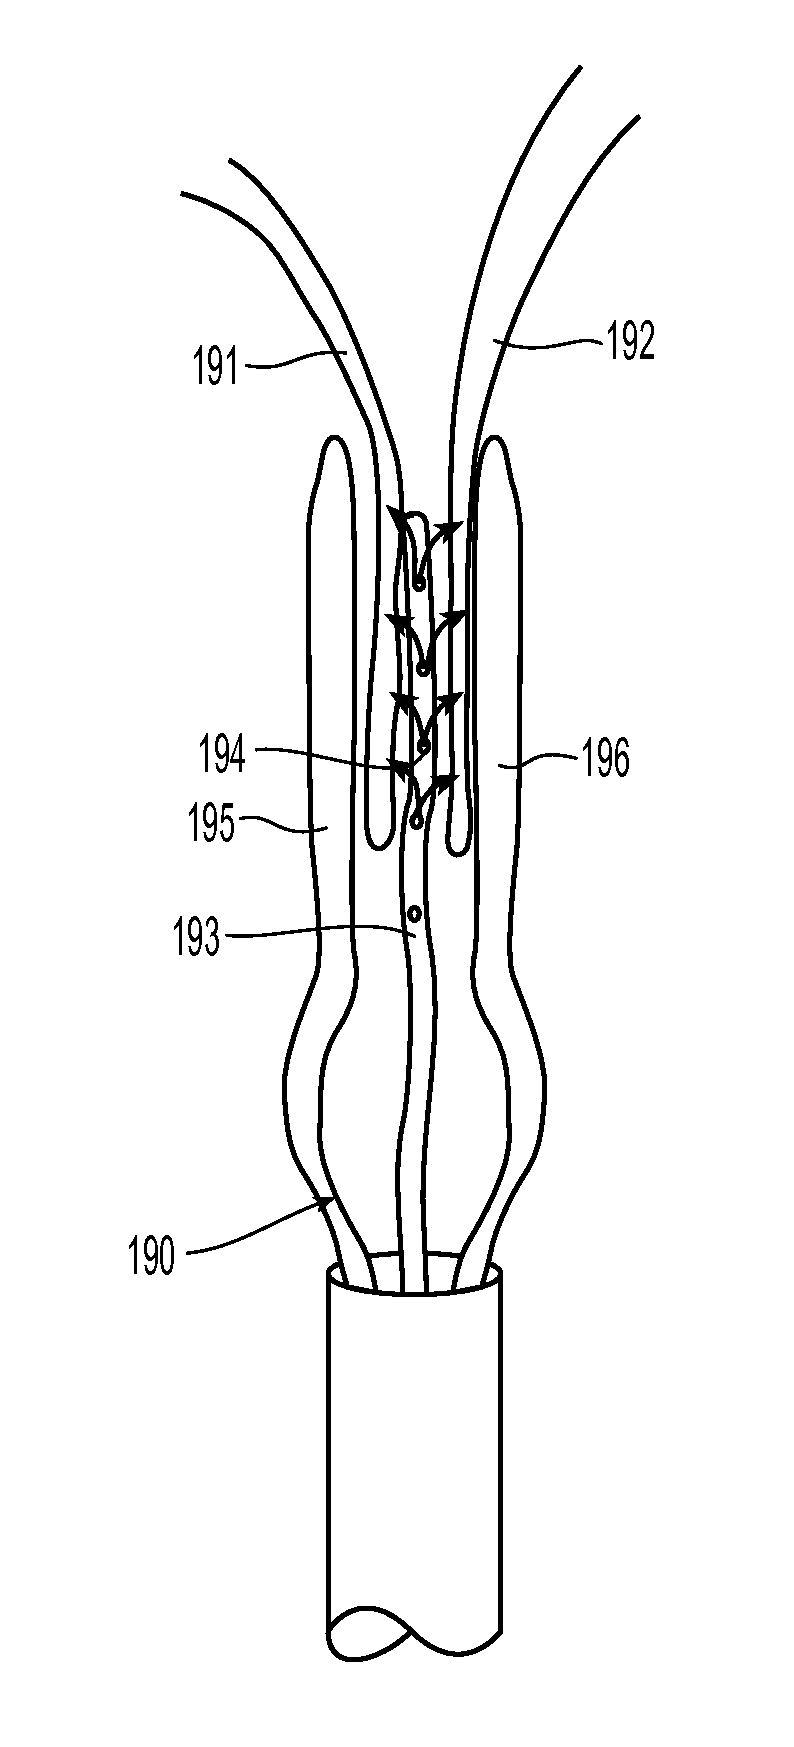 Systems and methods for endoluminal valve creation